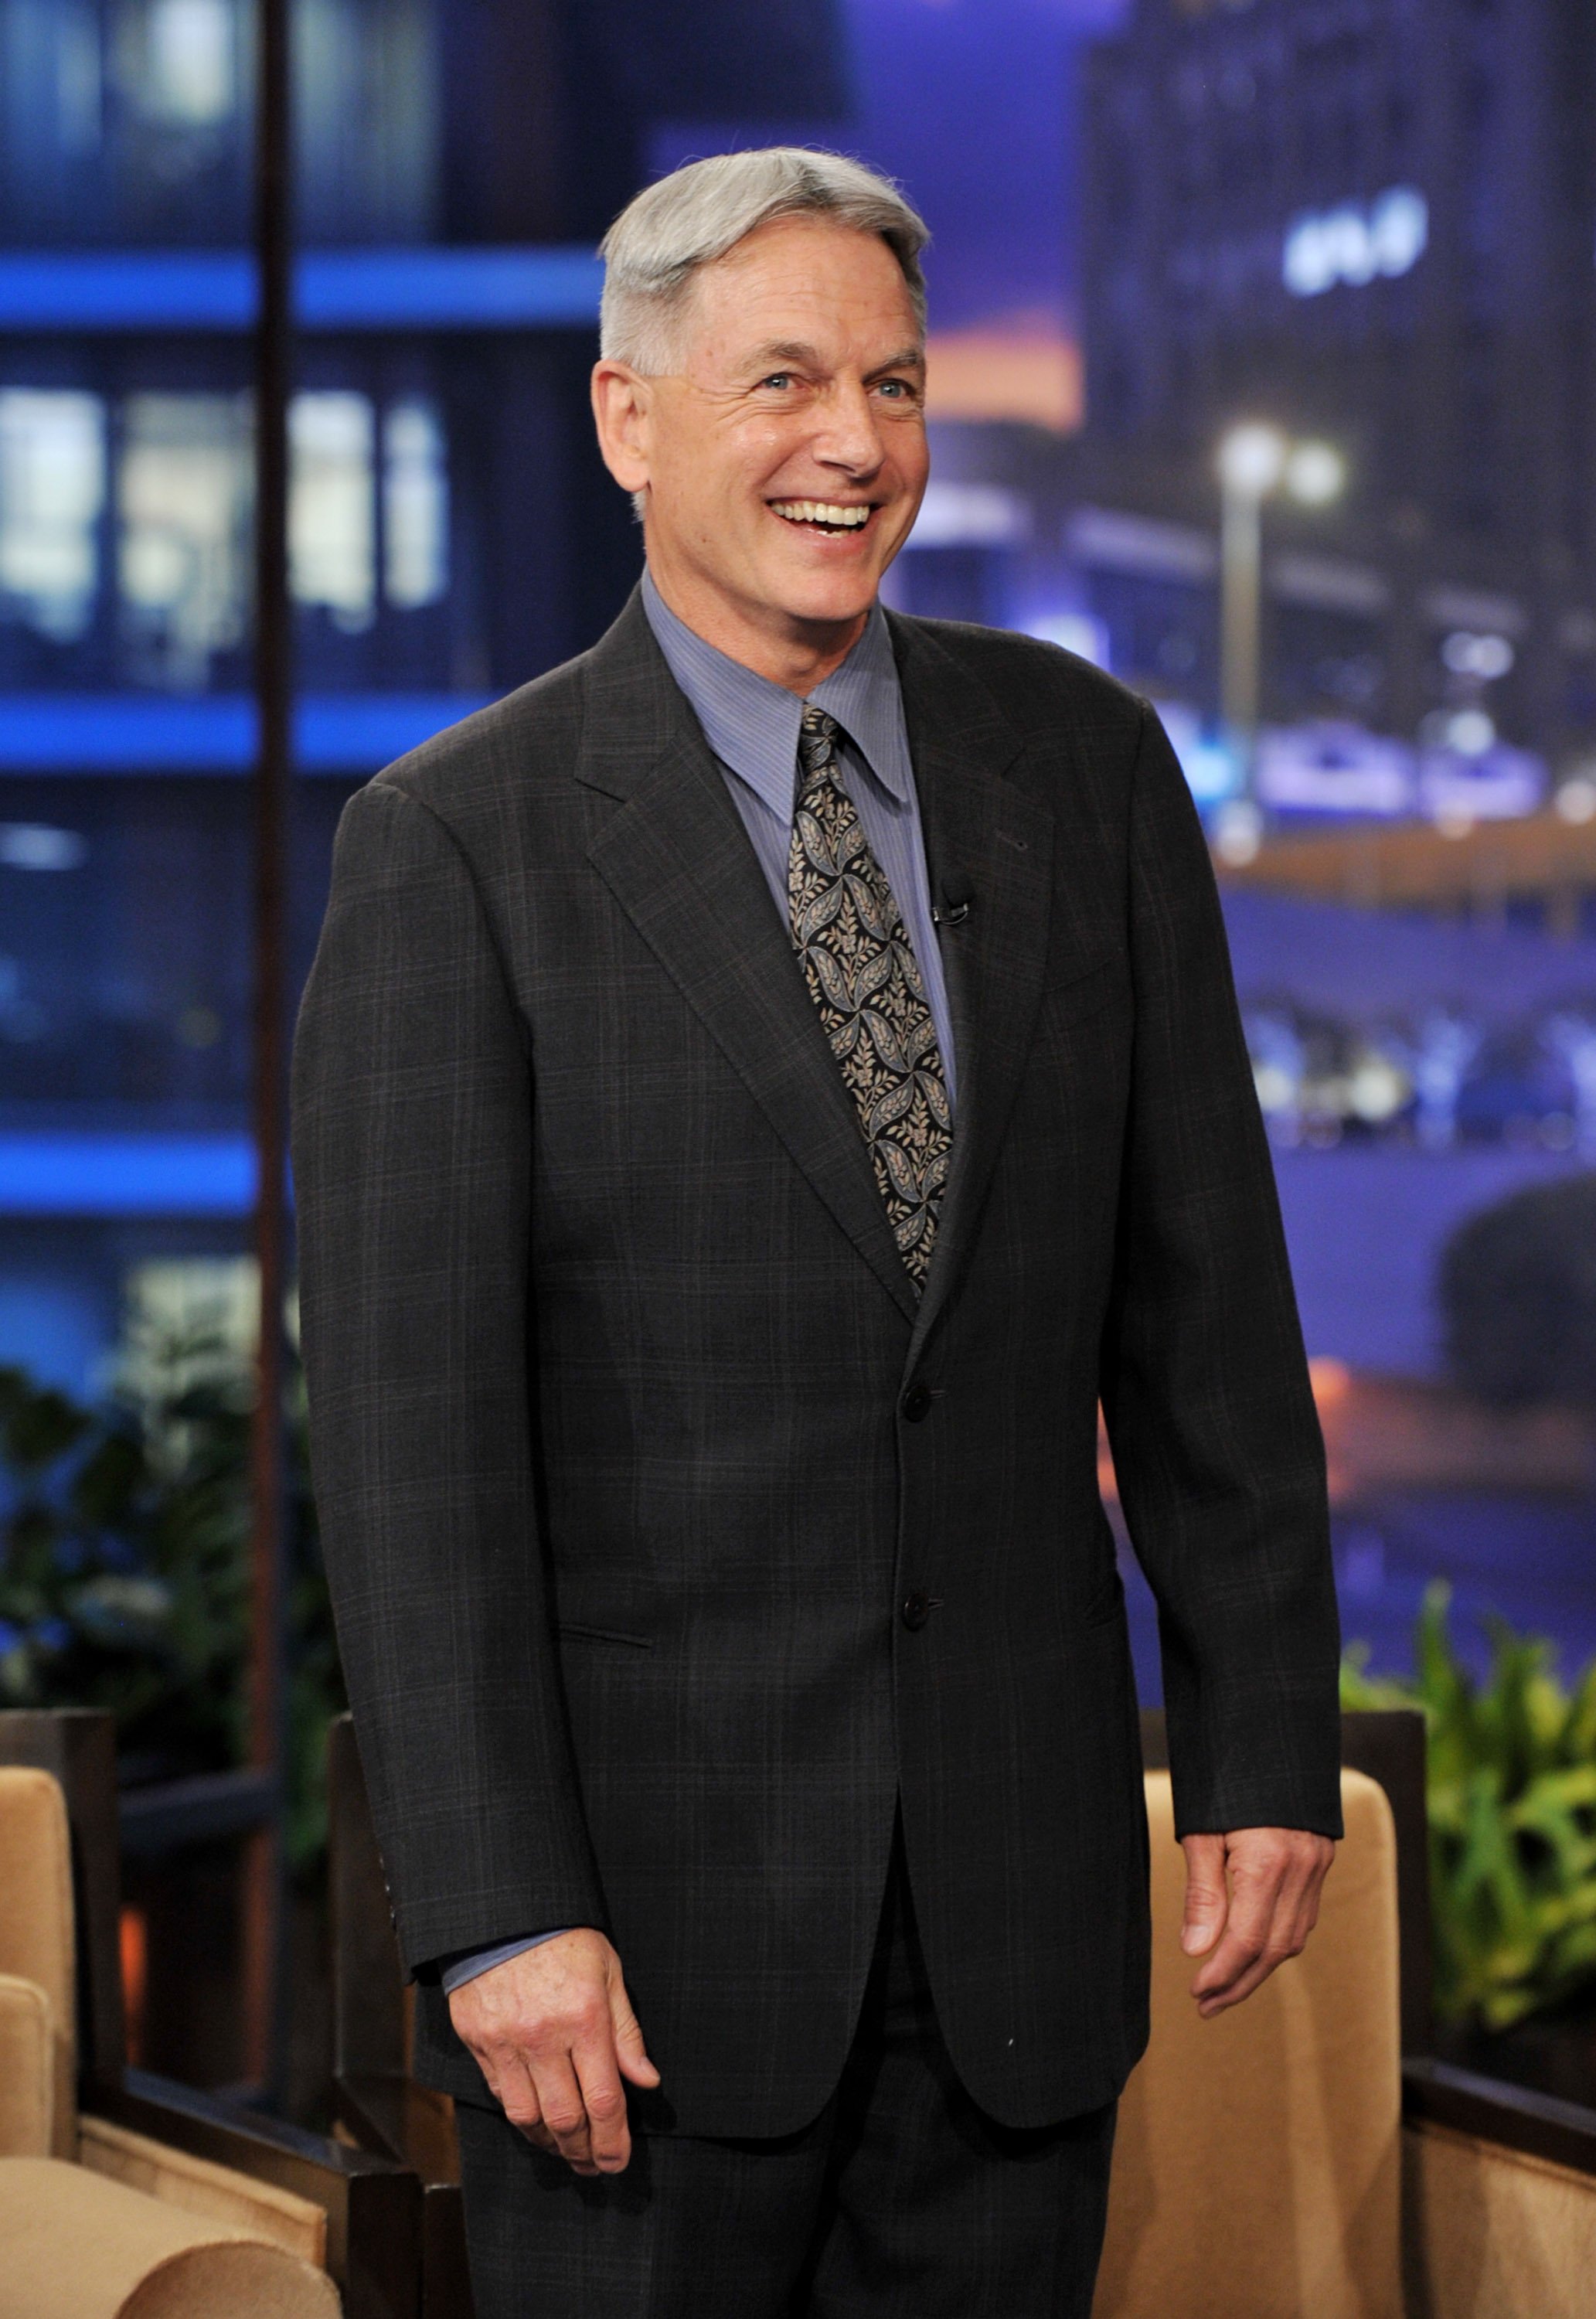 Mark Harmon appears on "The Tonight Show With Jay Leno" in Burbank, California on January 31, 2012 | Photo: Getty Images